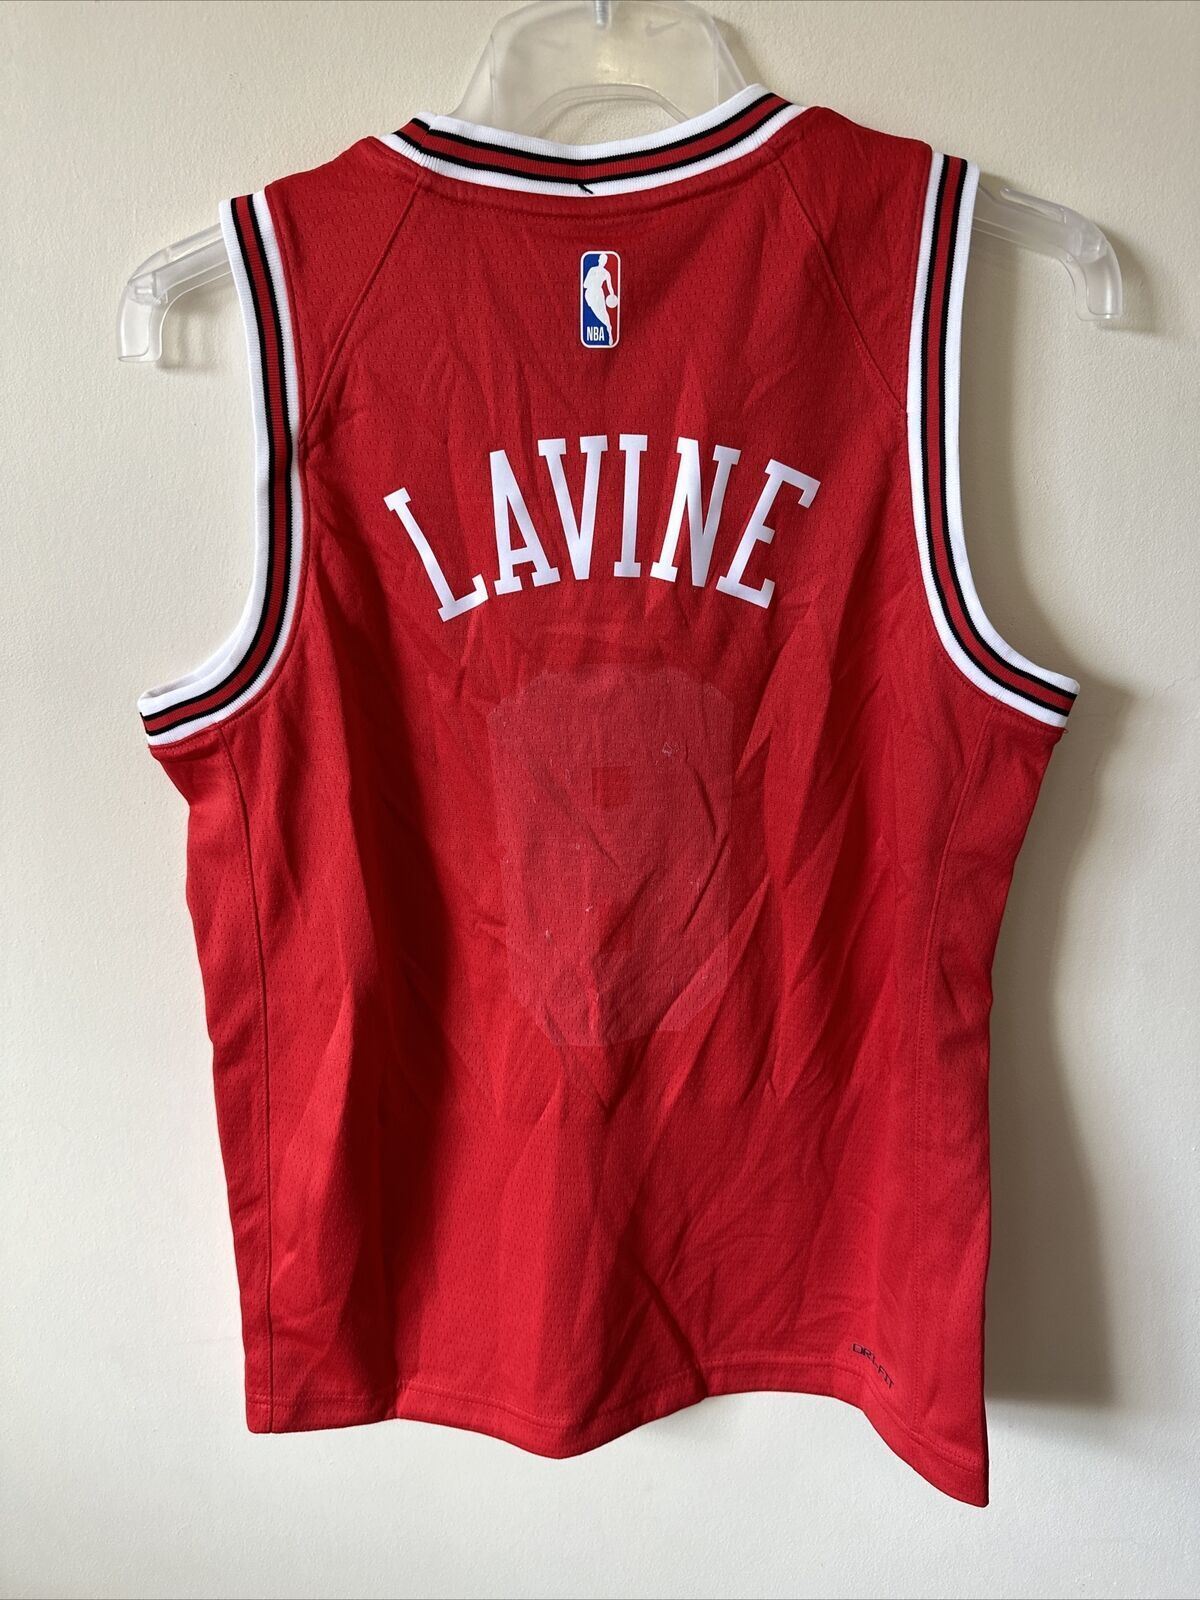 Nike NBA Chicago Bulls Icon Edition Jersey LAVINE Basketball Youth 12-13 Years